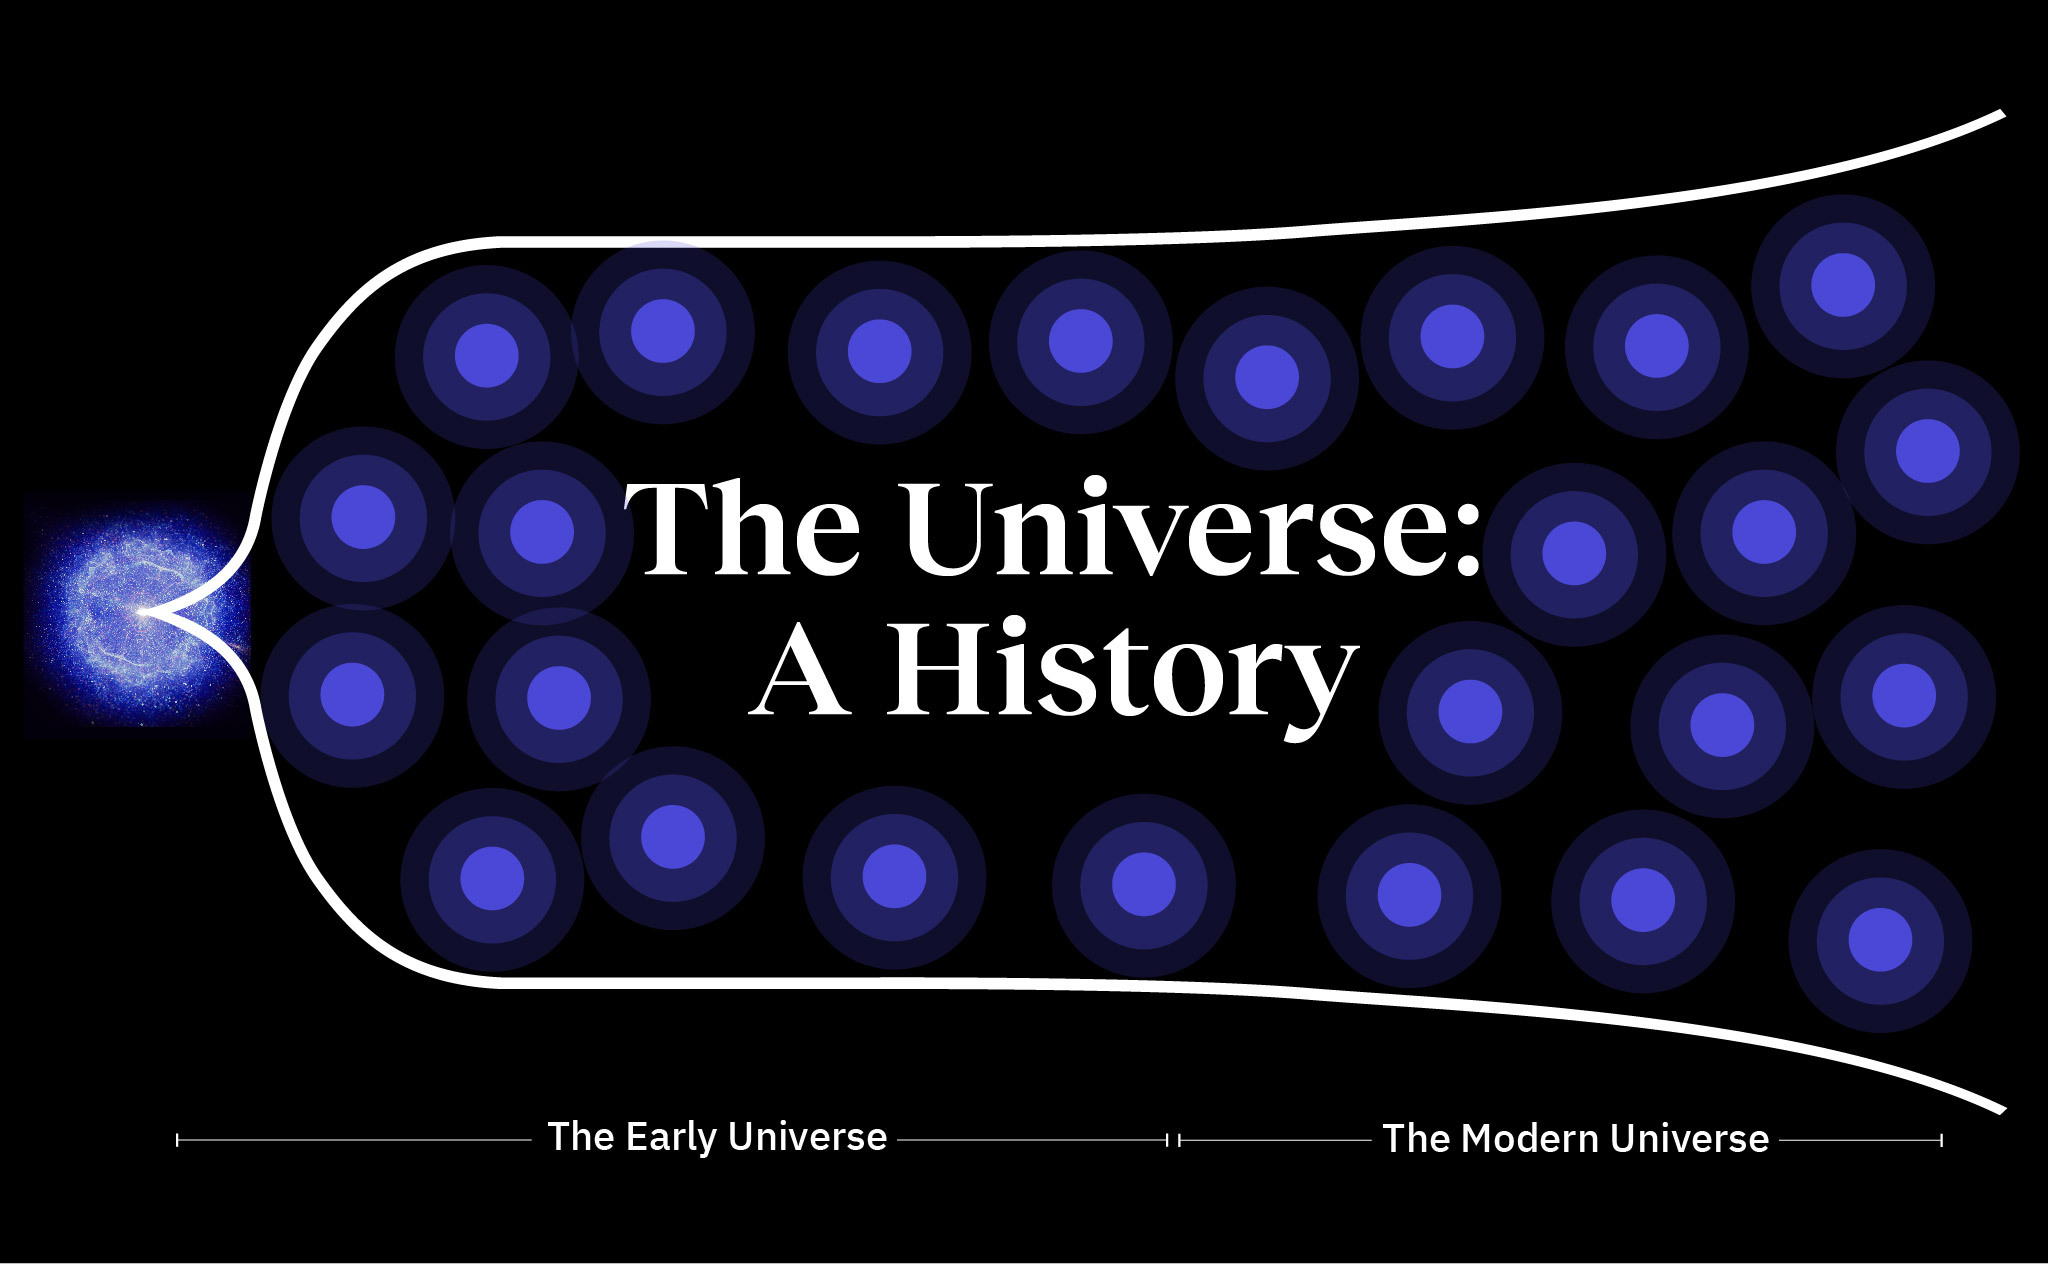 A graphical timeline depicting the evolution of the universe from the early universe to the modern universe.